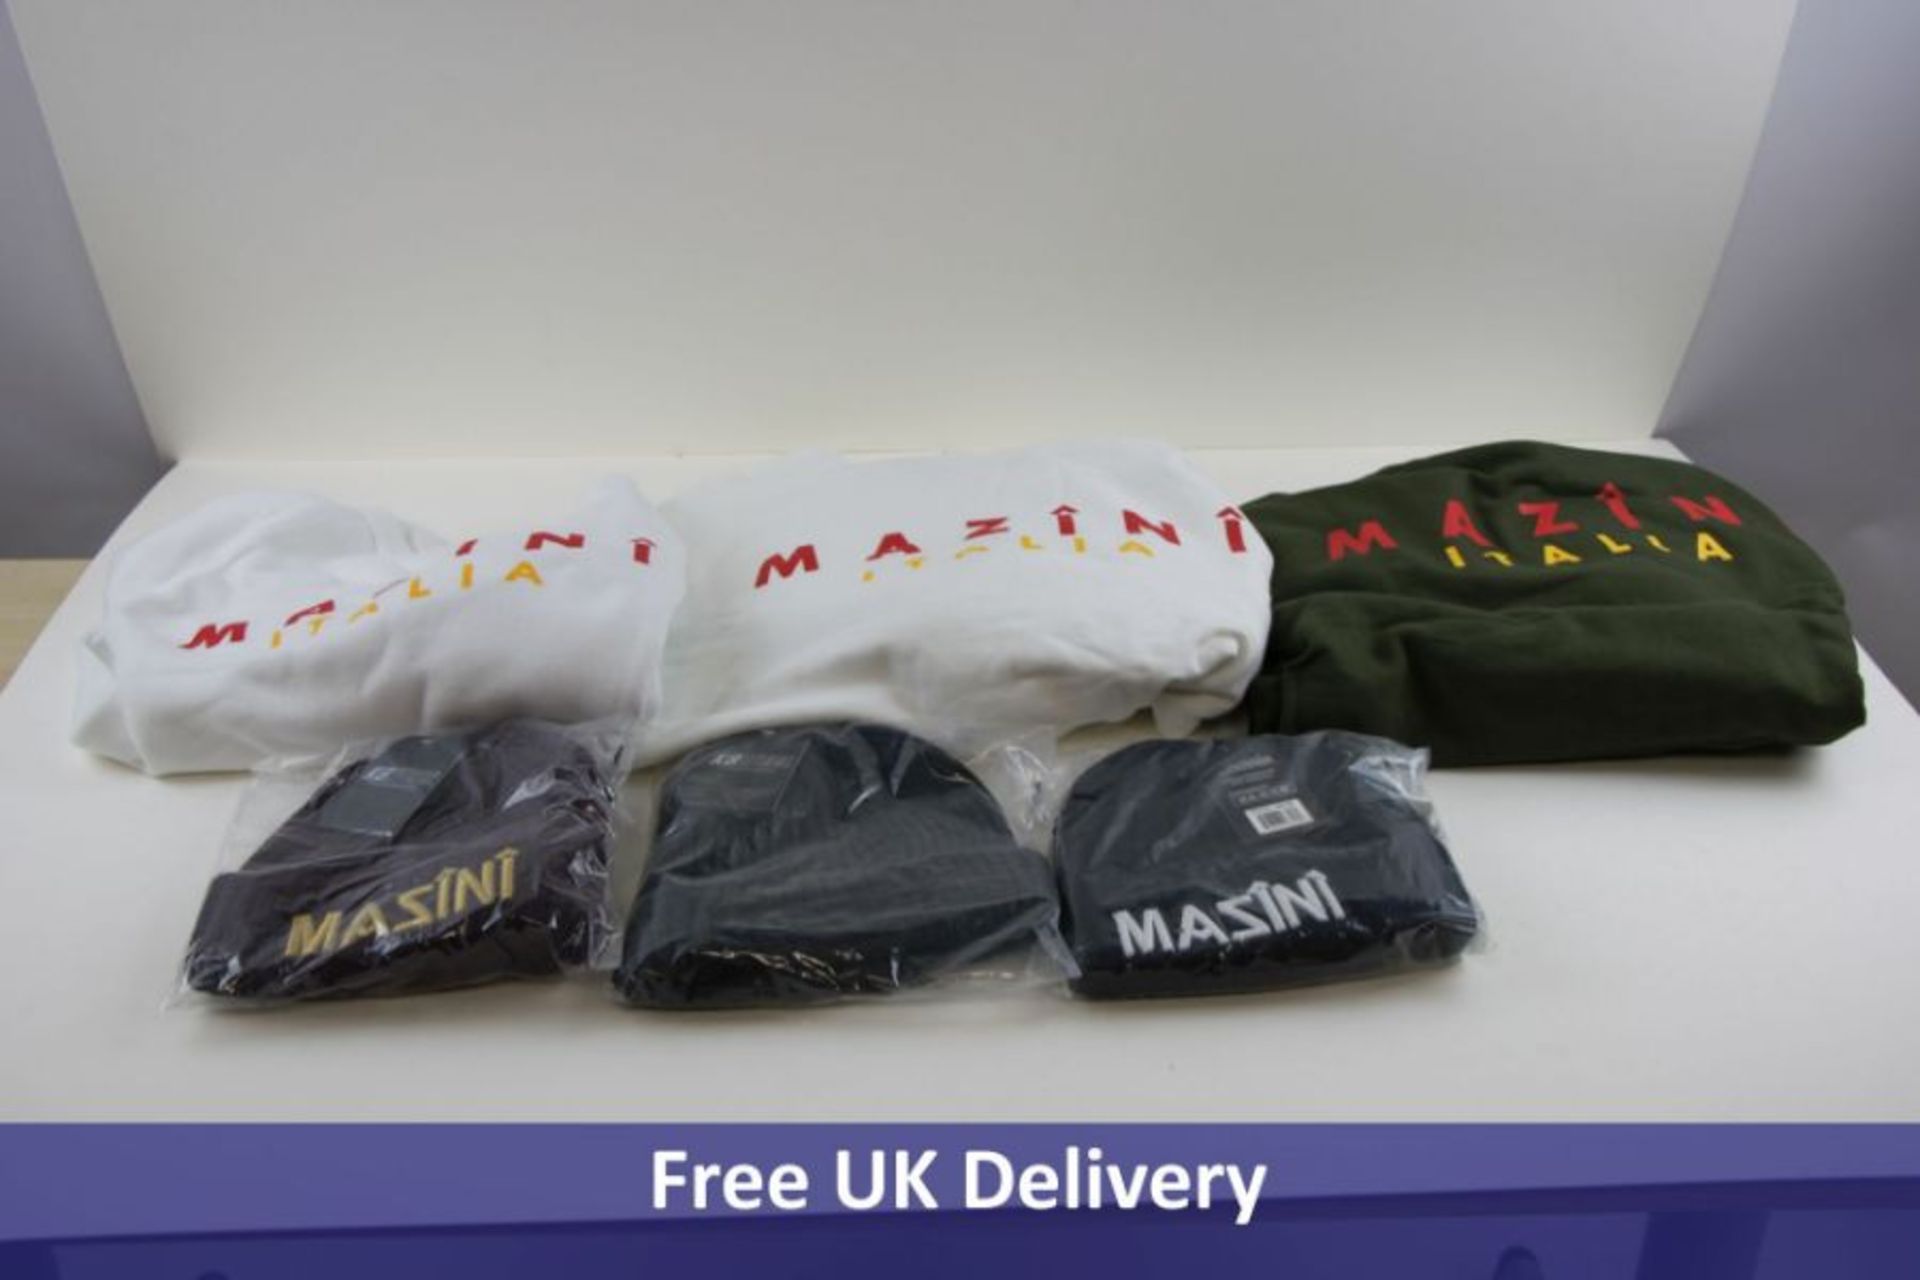 Six Mazini Italia Men's Items to Include 1x Hoodie, Olive Green, Size L, 1x Hoodie, White, Size M, 1